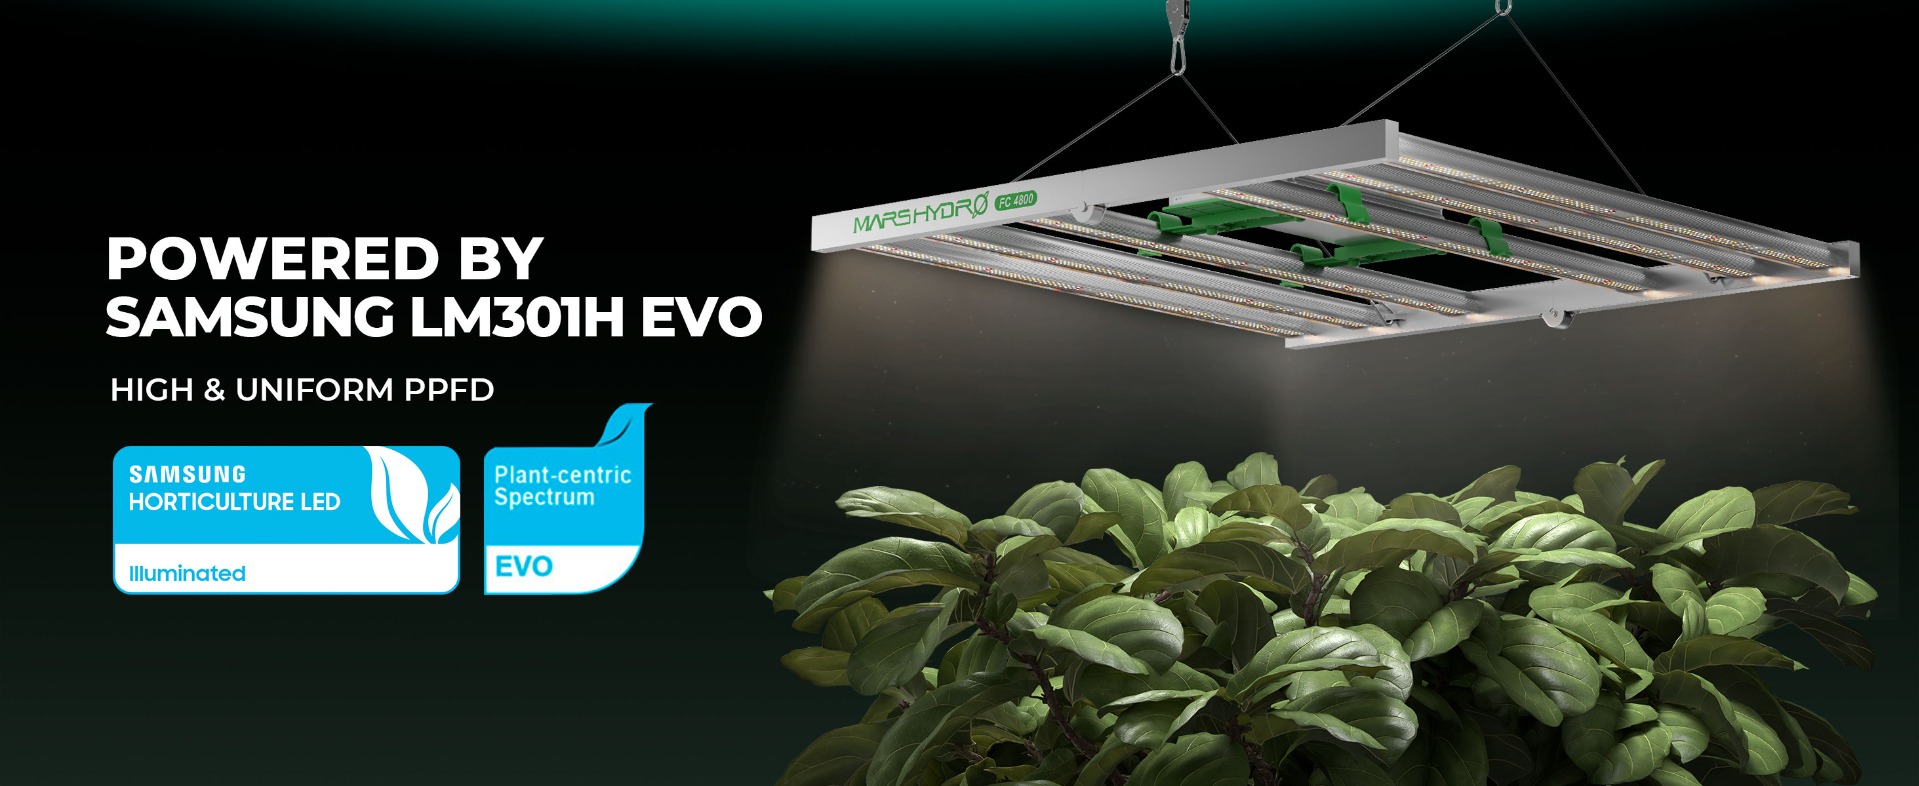 Mars Hydro Smart FC4800-EVO LED Grow Light, more convenient to control on phone